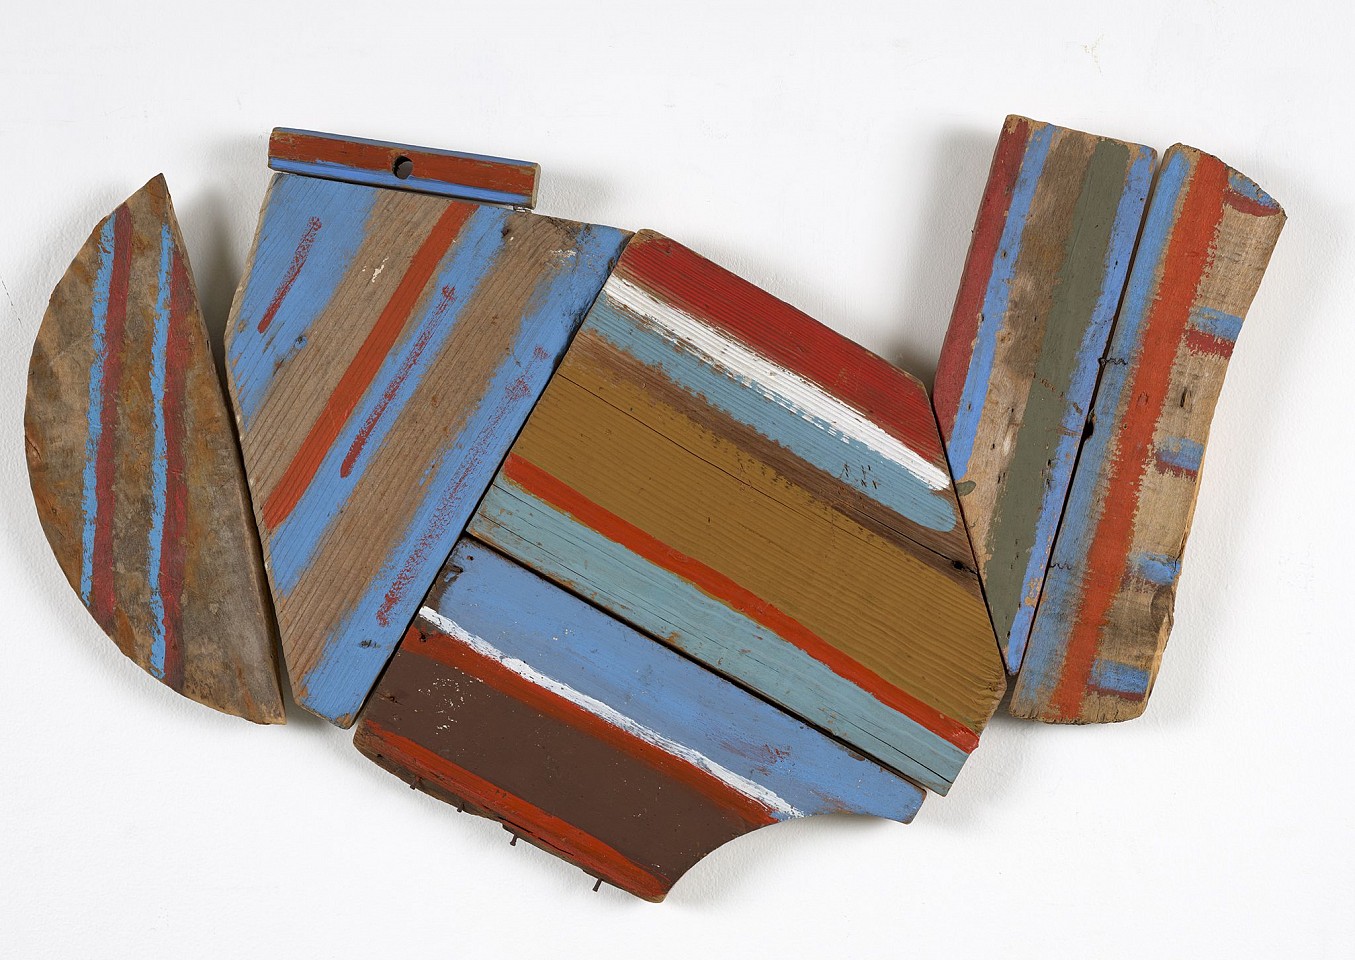 Betty Parsons, It Was That Way | SOLD, 1971
Acrylic on wood, 20 x 29 in. (50.8 x 73.7 cm)
PARS-00003